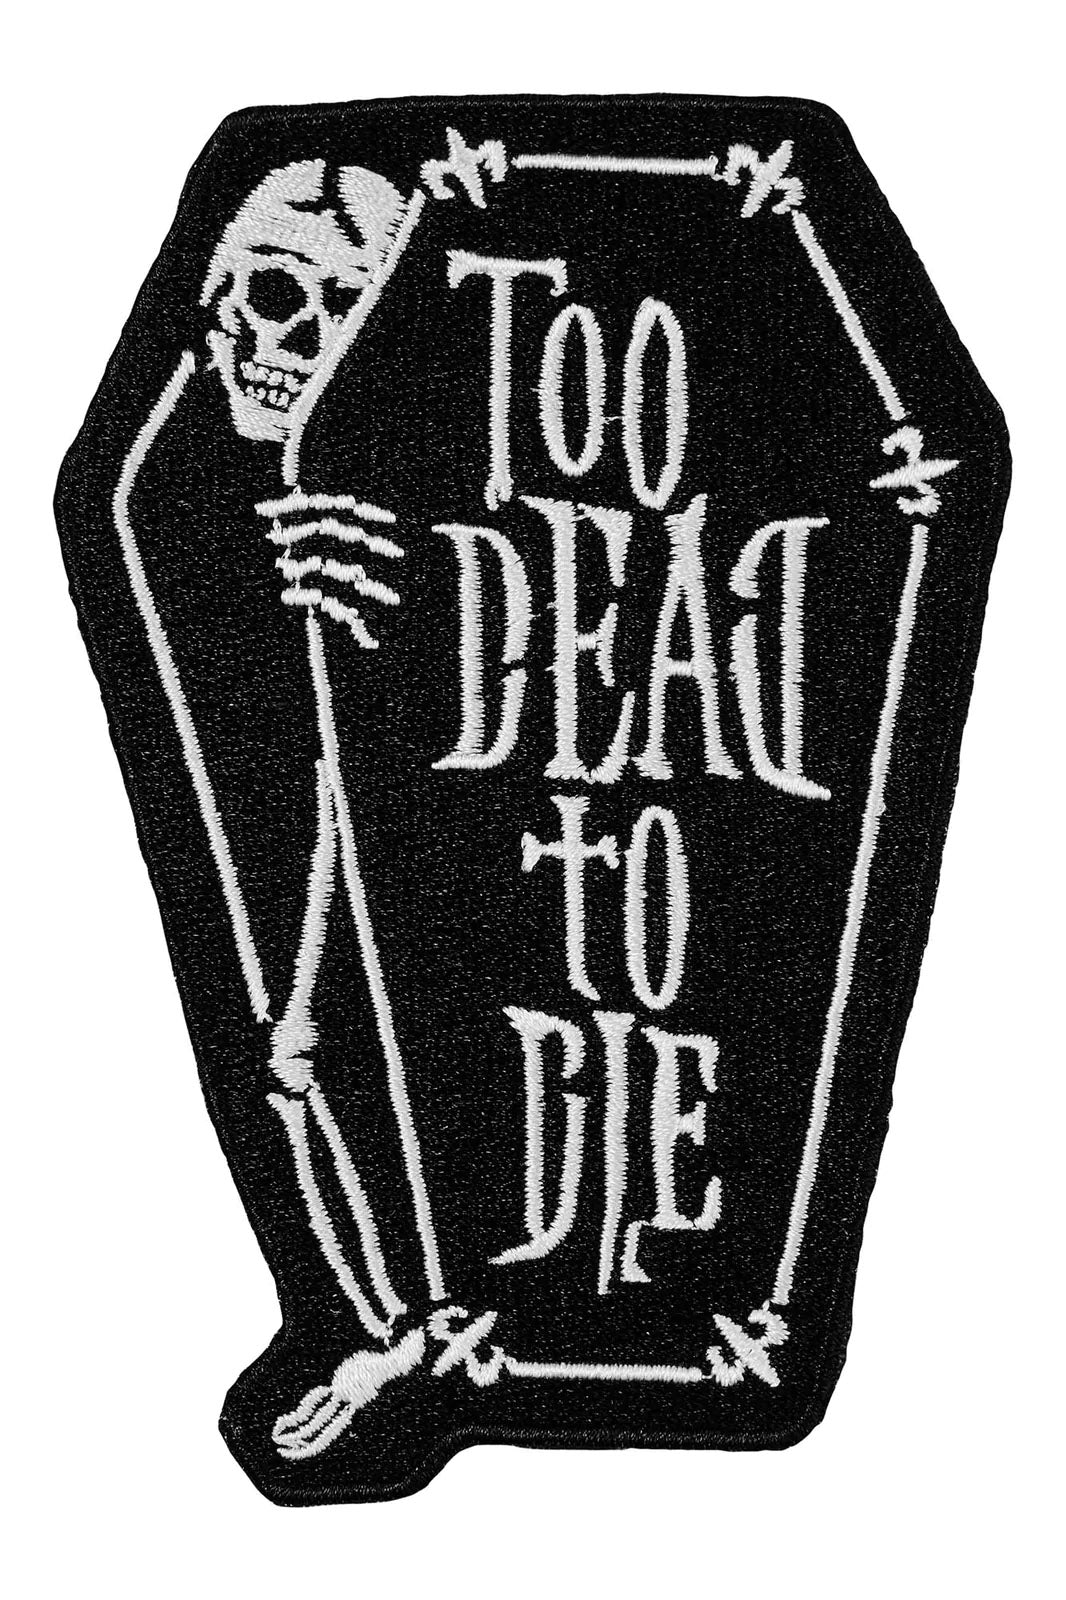 Too Dead Patch